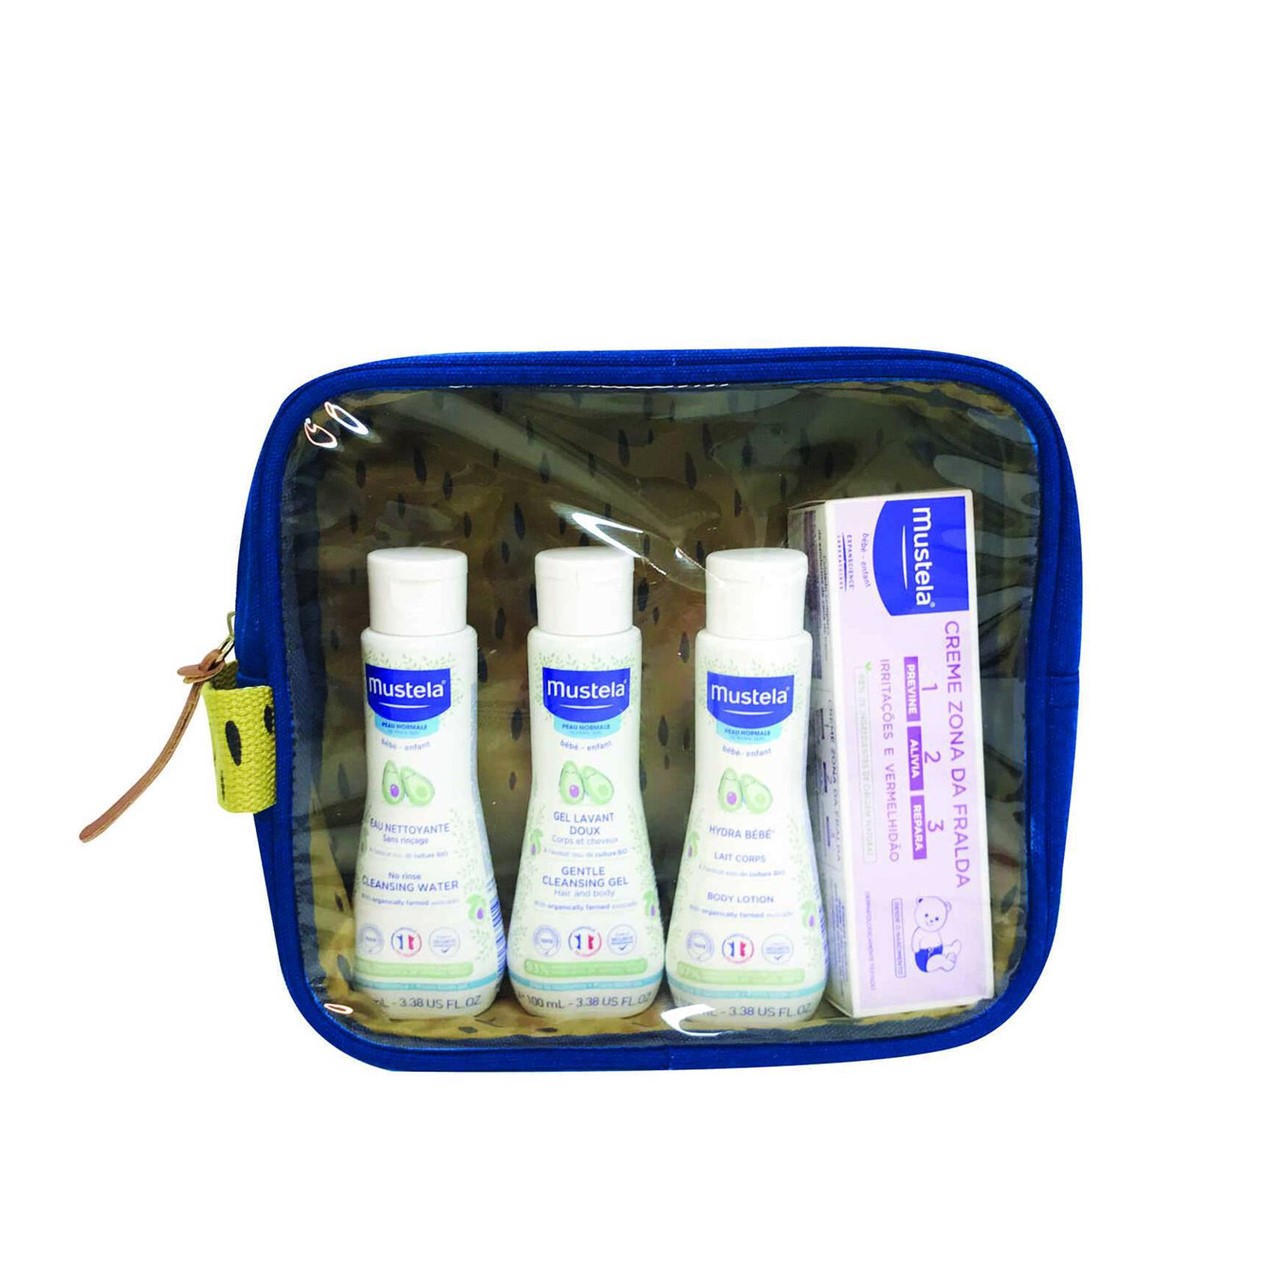 Buy Mustela Essential Kit 4 Products for Babies Newborns Travel